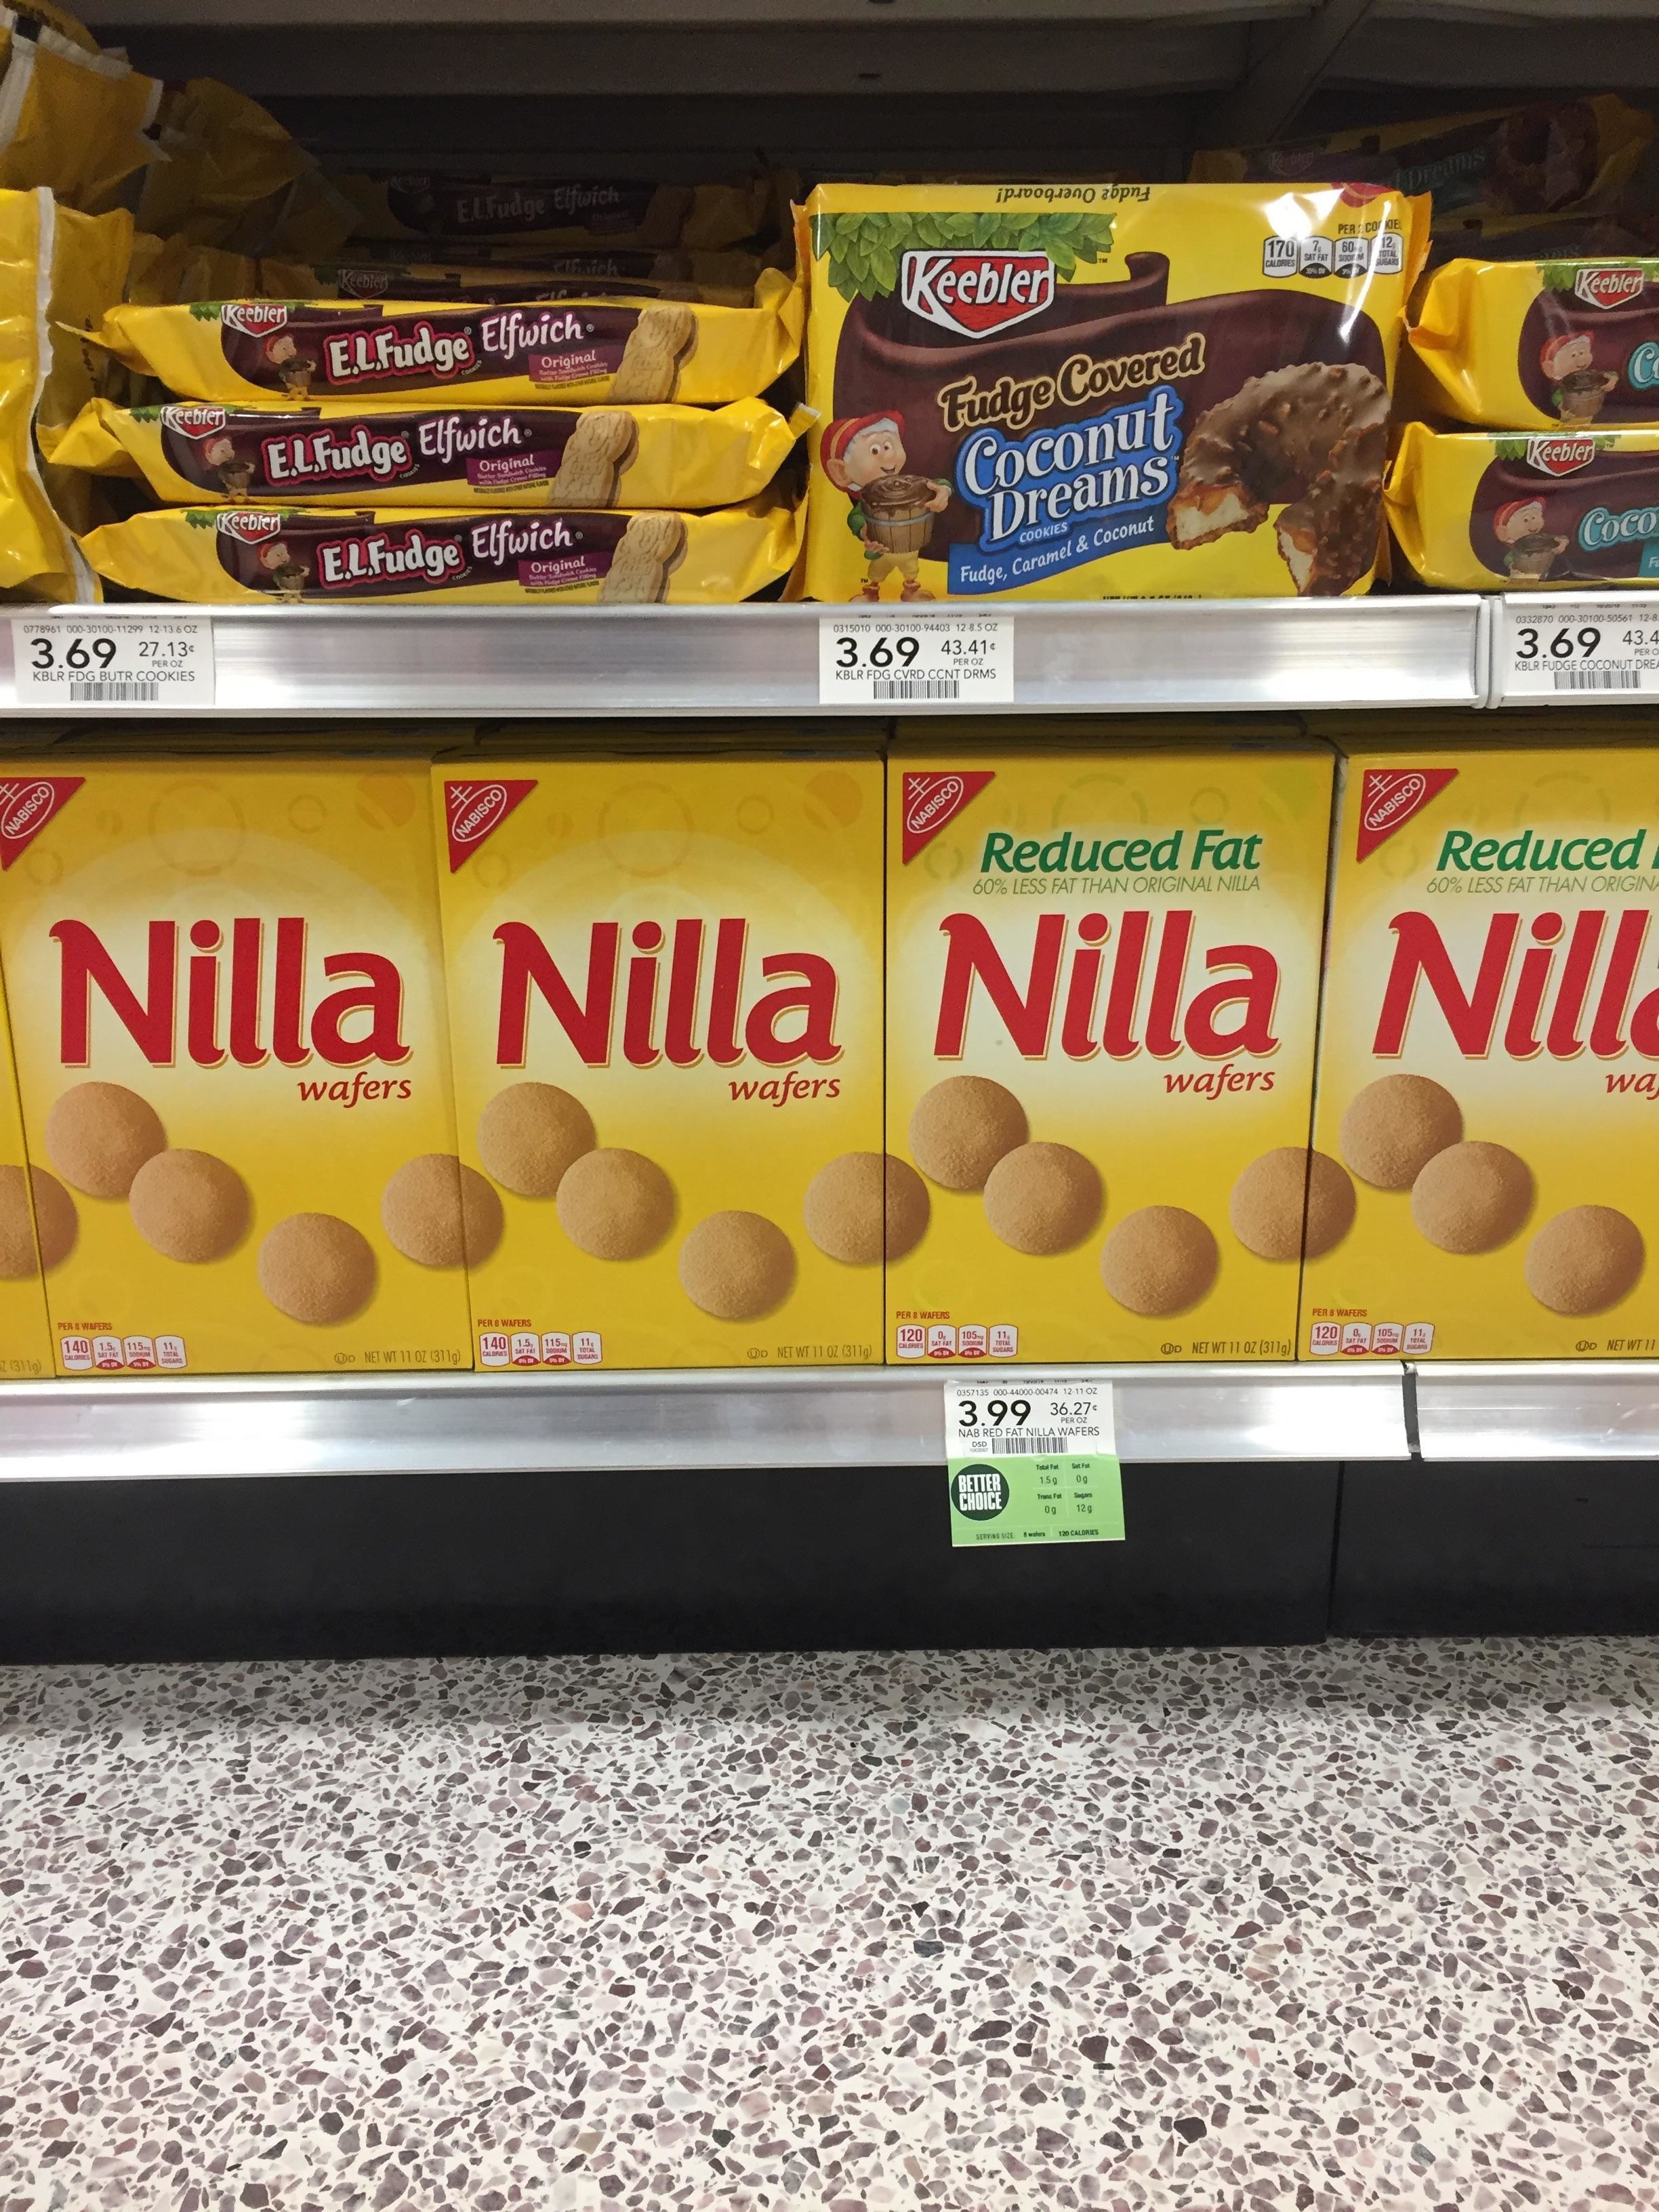 17 Times Things Lined Up So Perfectly That It Will Make You Do A Double Take